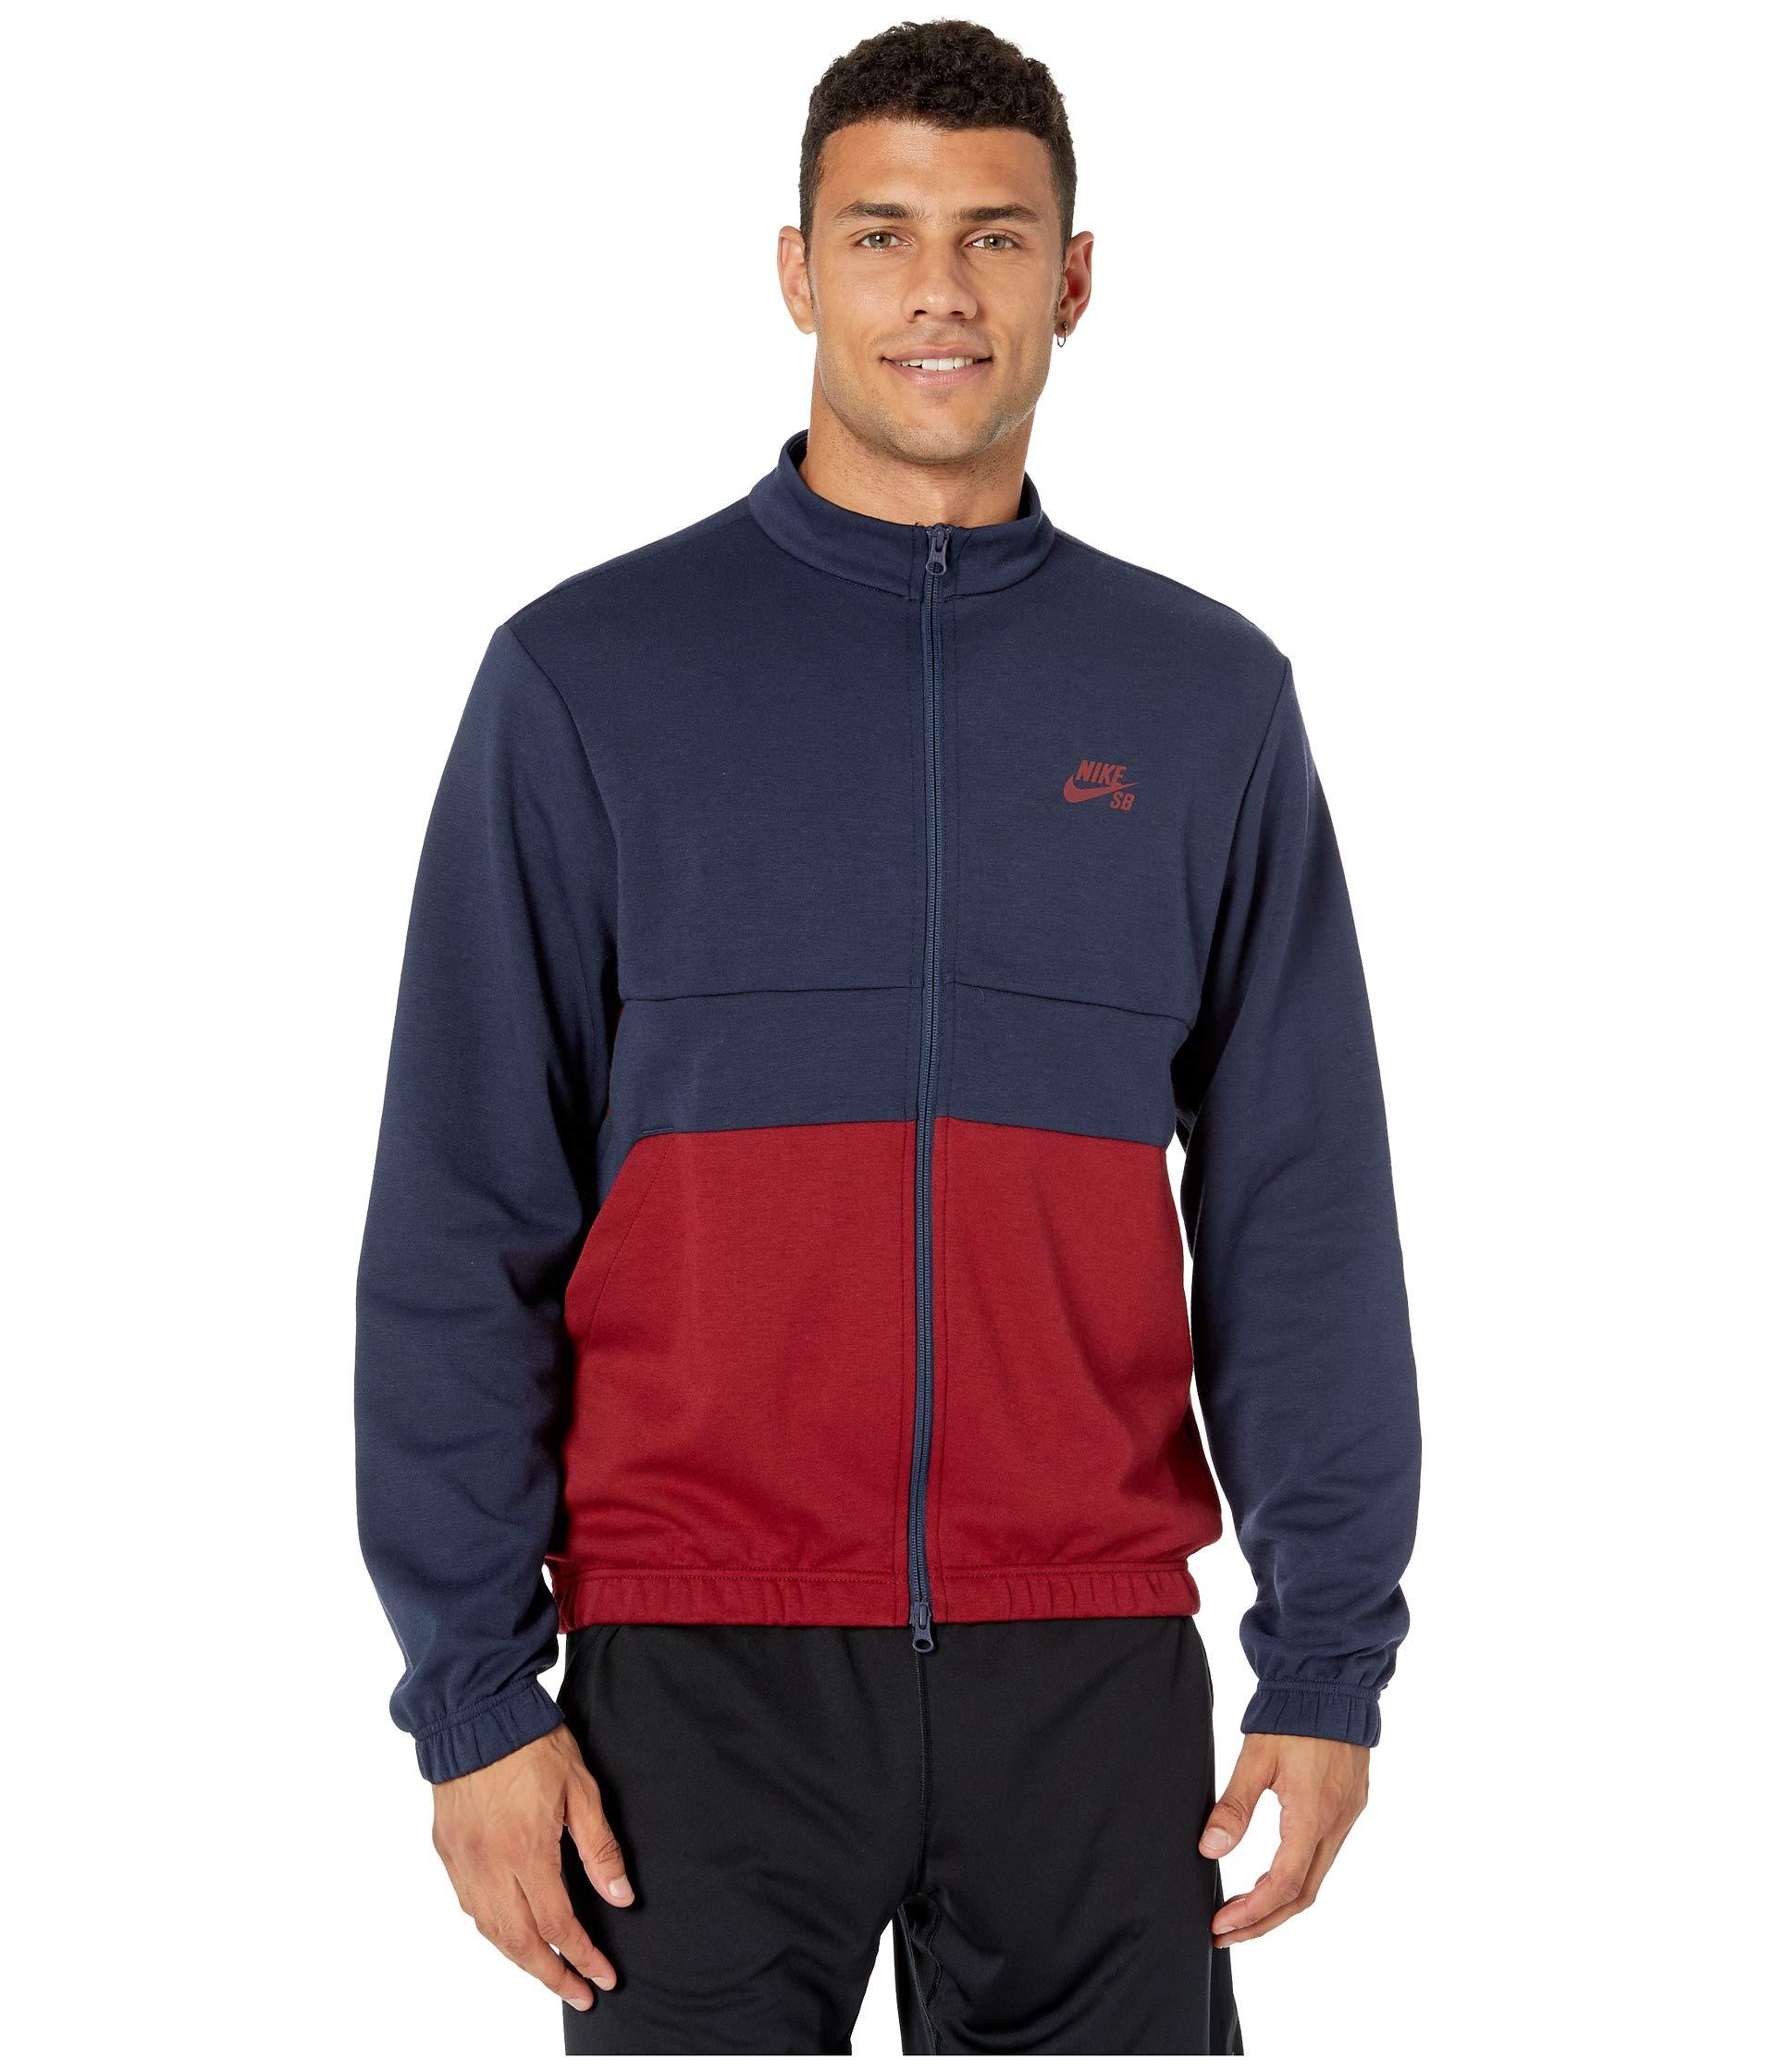 Nike Cotton Dri-fit Track Jacket in Navy (Blue) for Men - Lyst